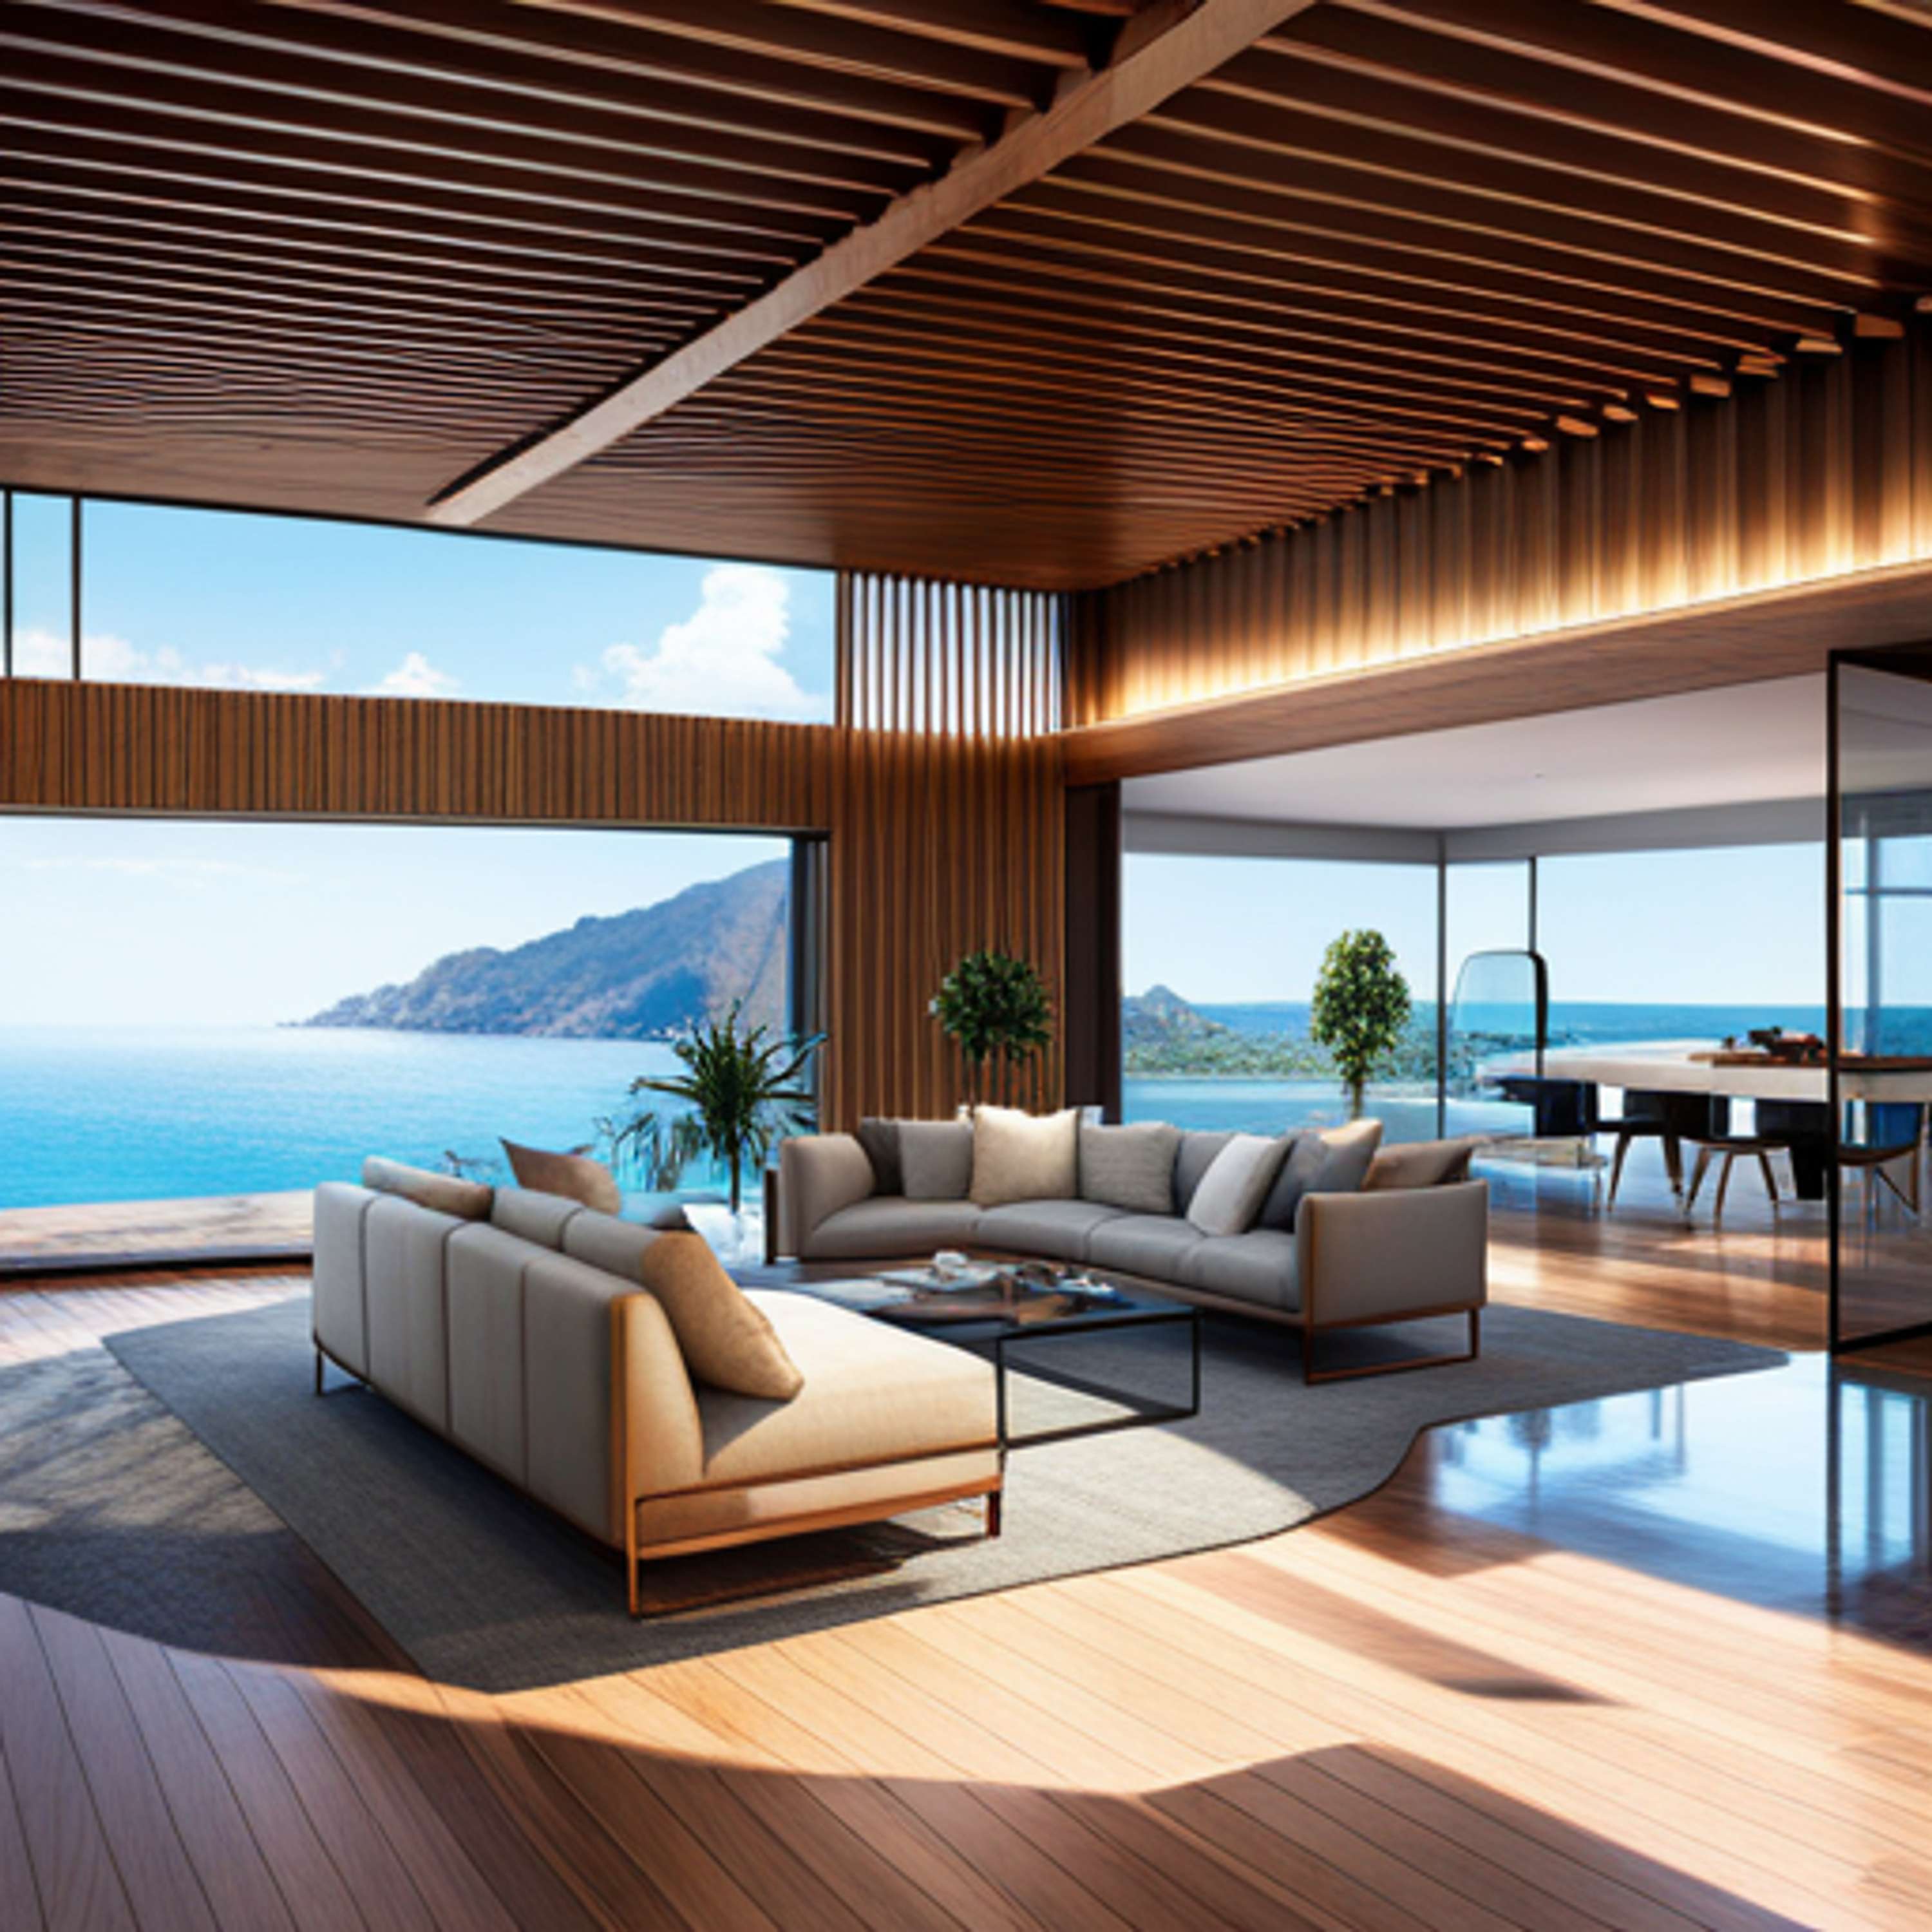 Discover the Ultimate Guide to Malibu's Luxurious Real Estate Market